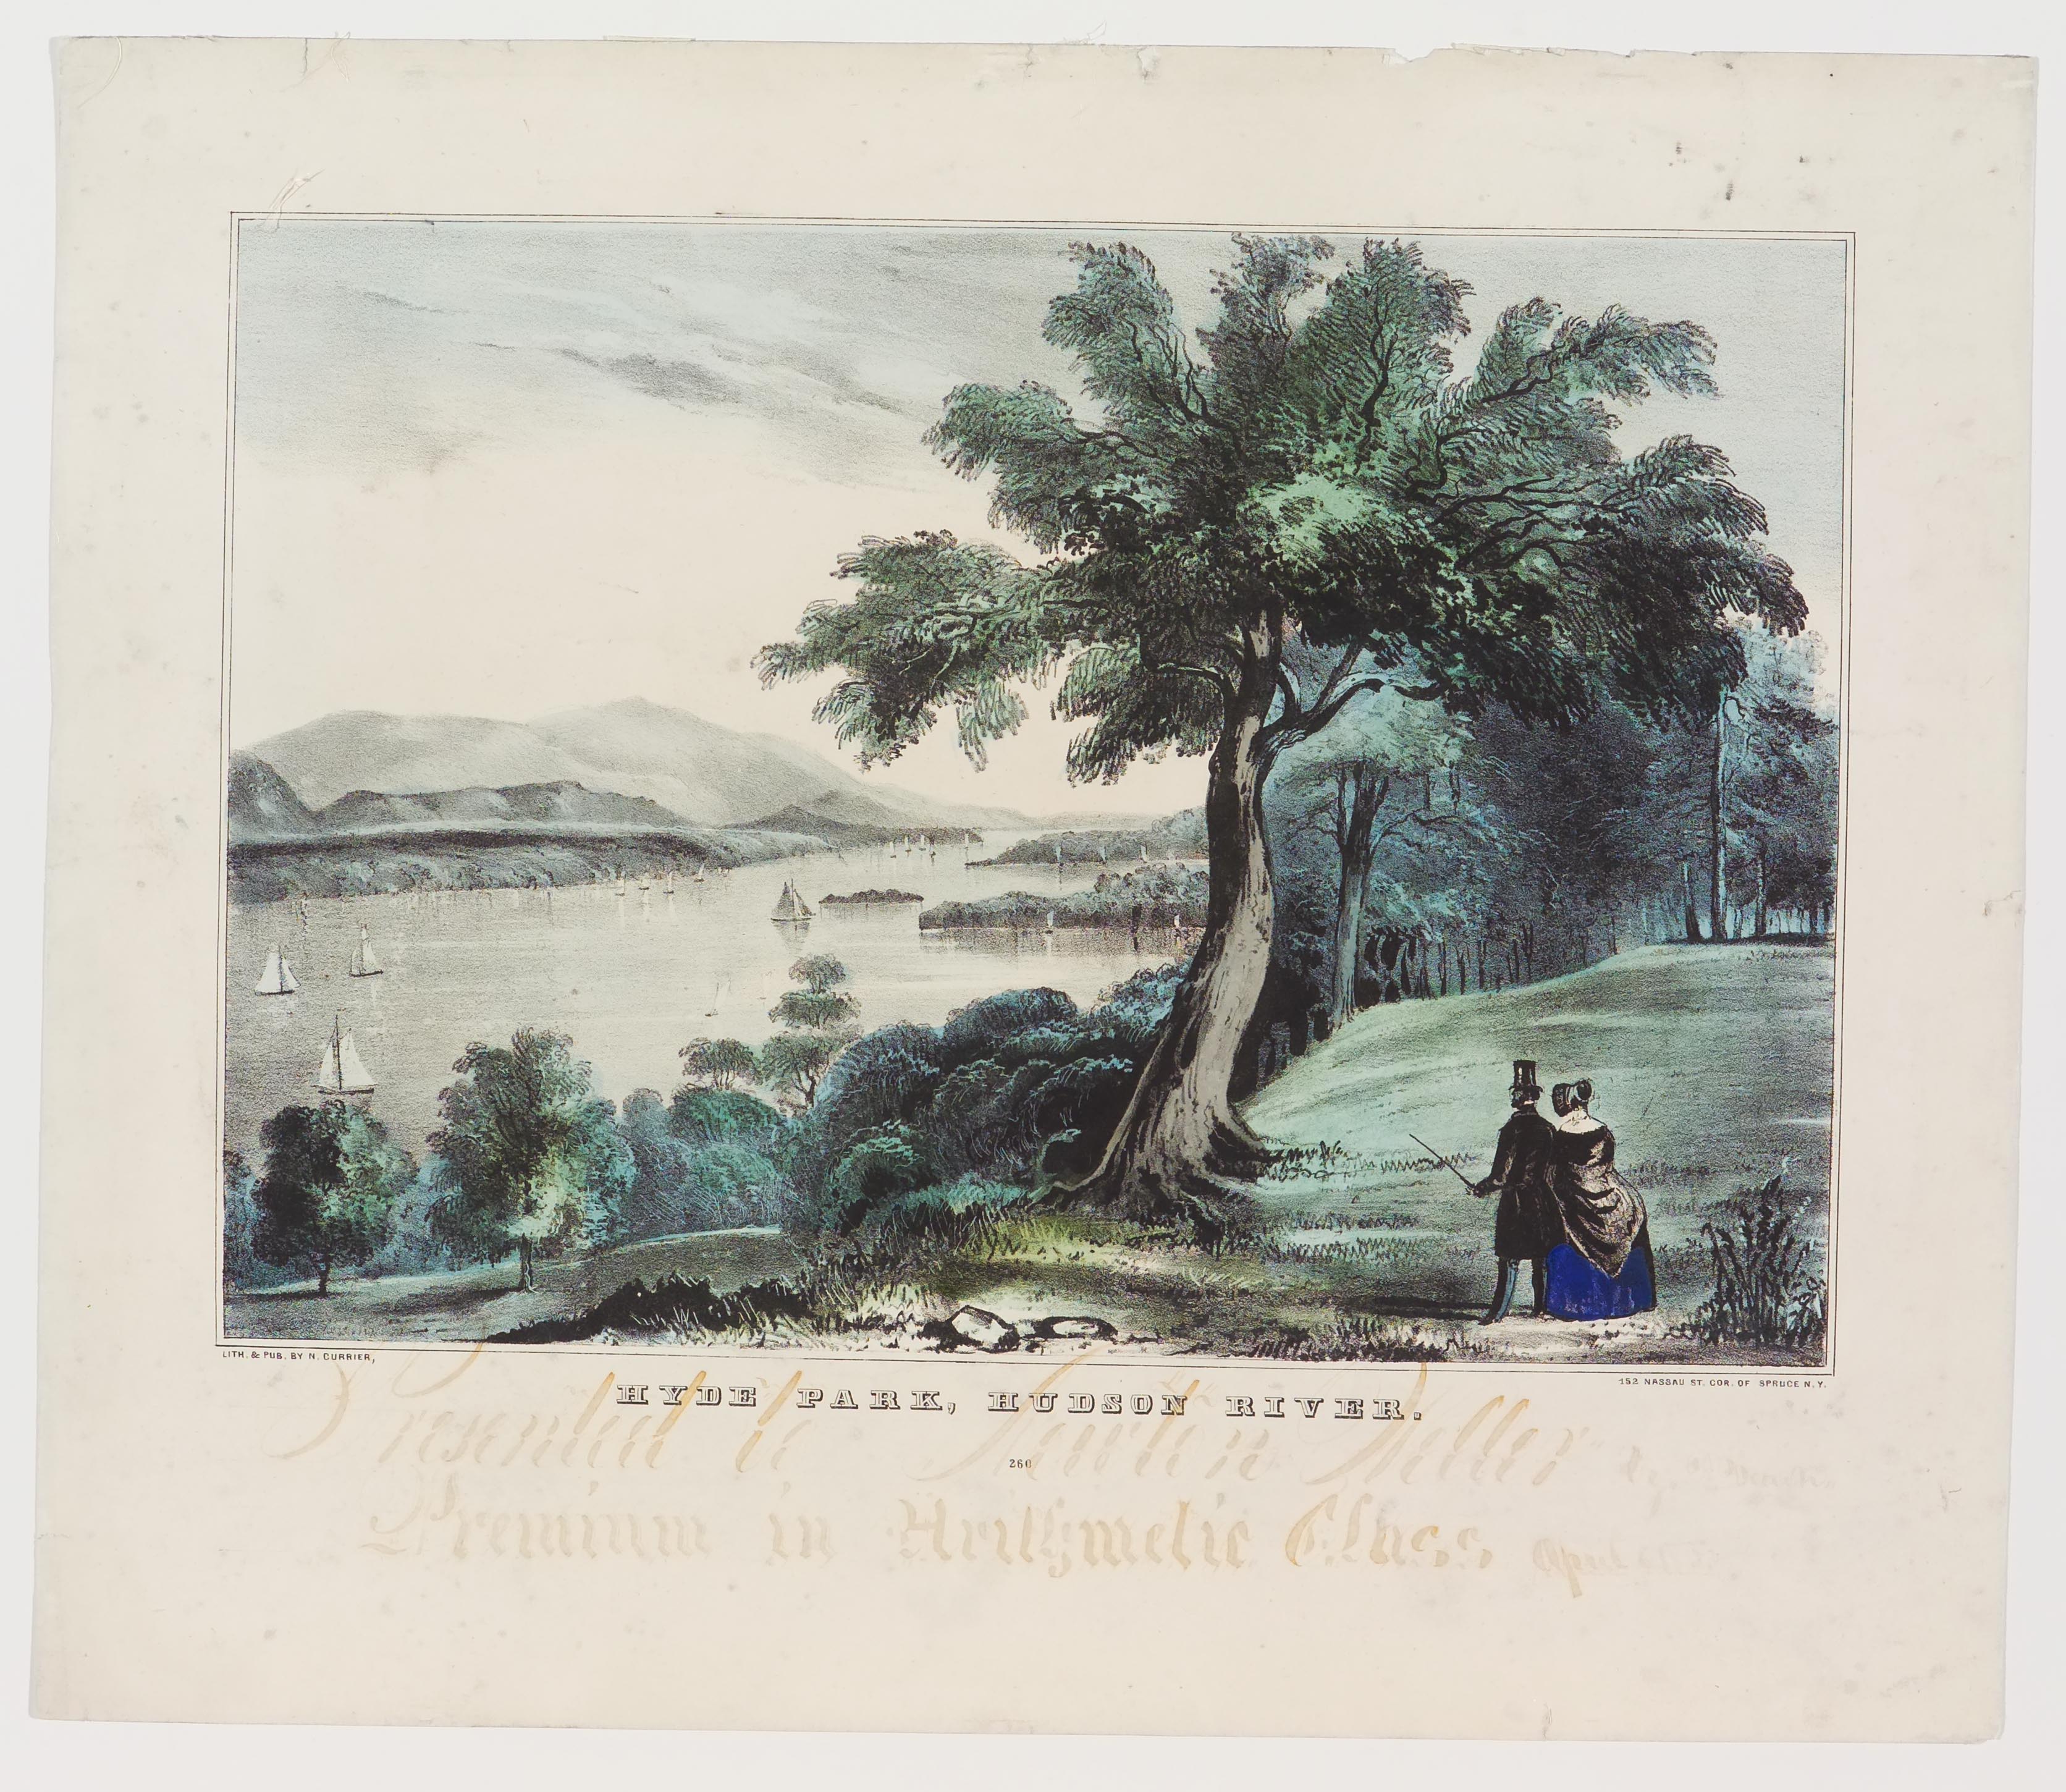 Sailboats in river to left; large tree in center; man and woman approaching tree and river from right